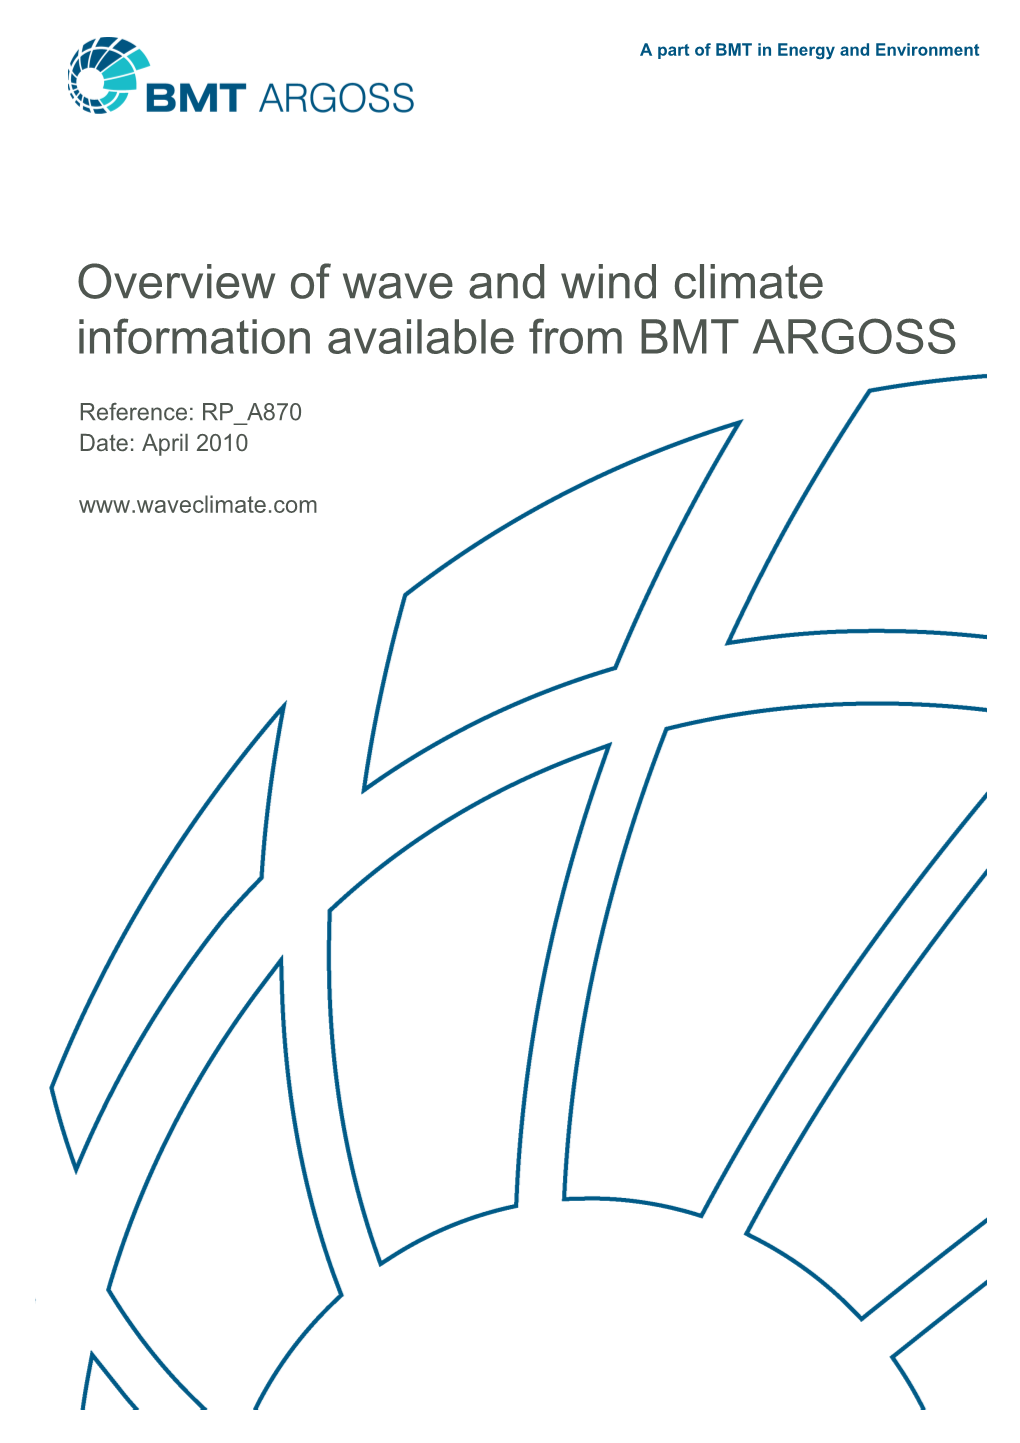 BMT Argossoverview of Wave and Wind Climate Information Available from BMT ARGOSS